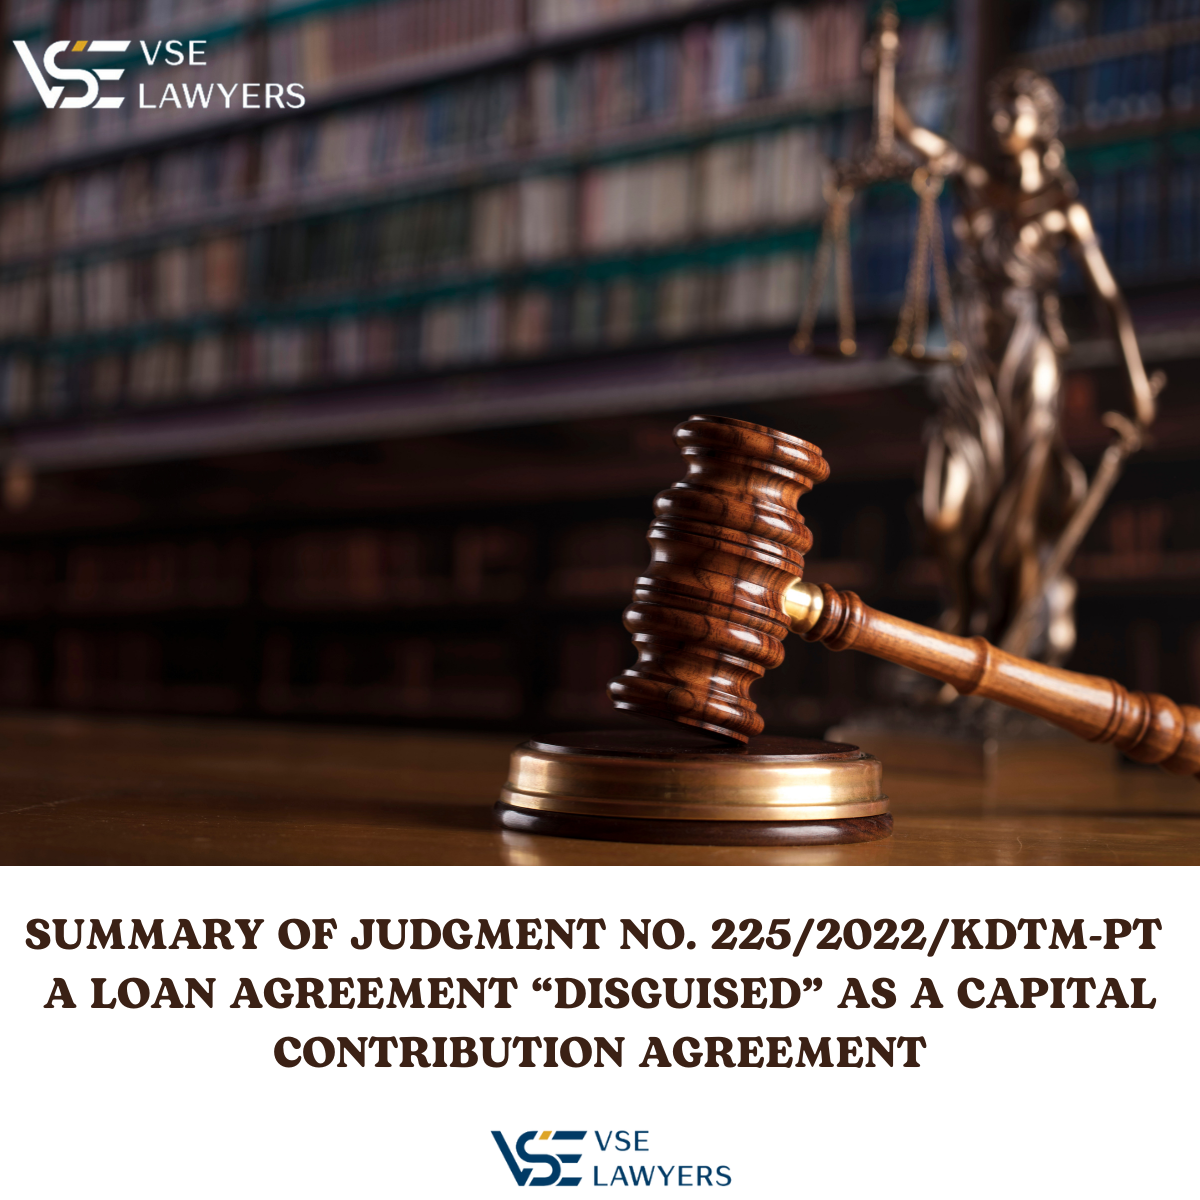 SUMMARY OF JUDGMENT NO. 225/2022/KDTM-PT A LOAN AGREEMENT “DISGUISED” AS A CAPITAL CONTRIBUTION AGREEMENT